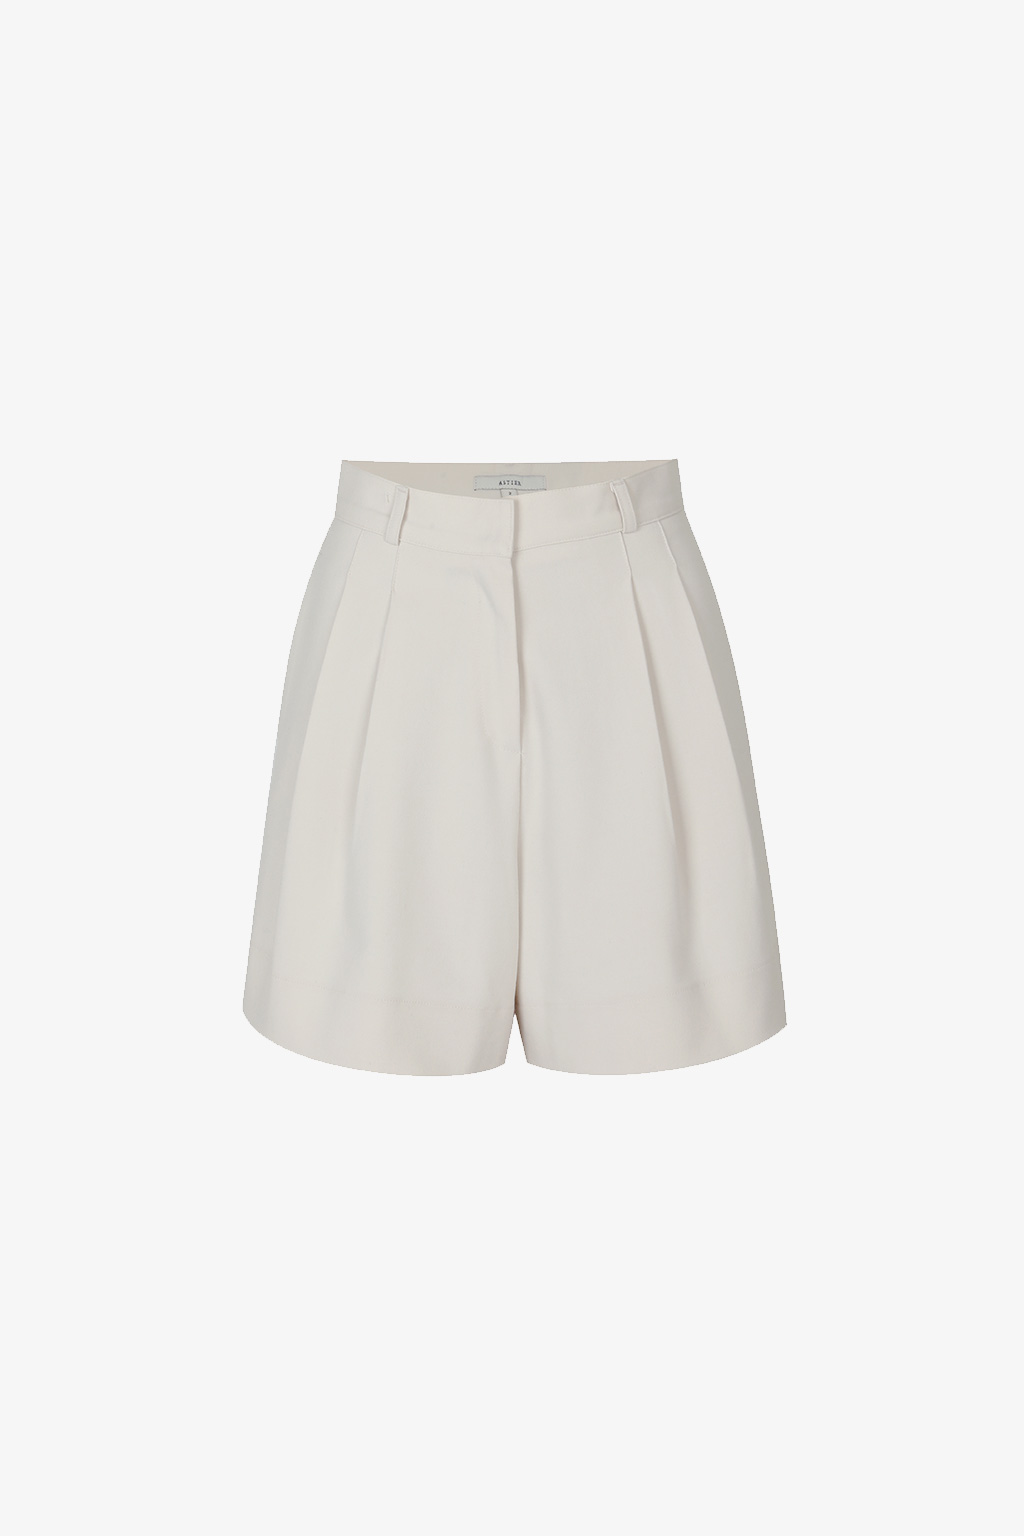 [ASTIER] fave shorts f/w ver.